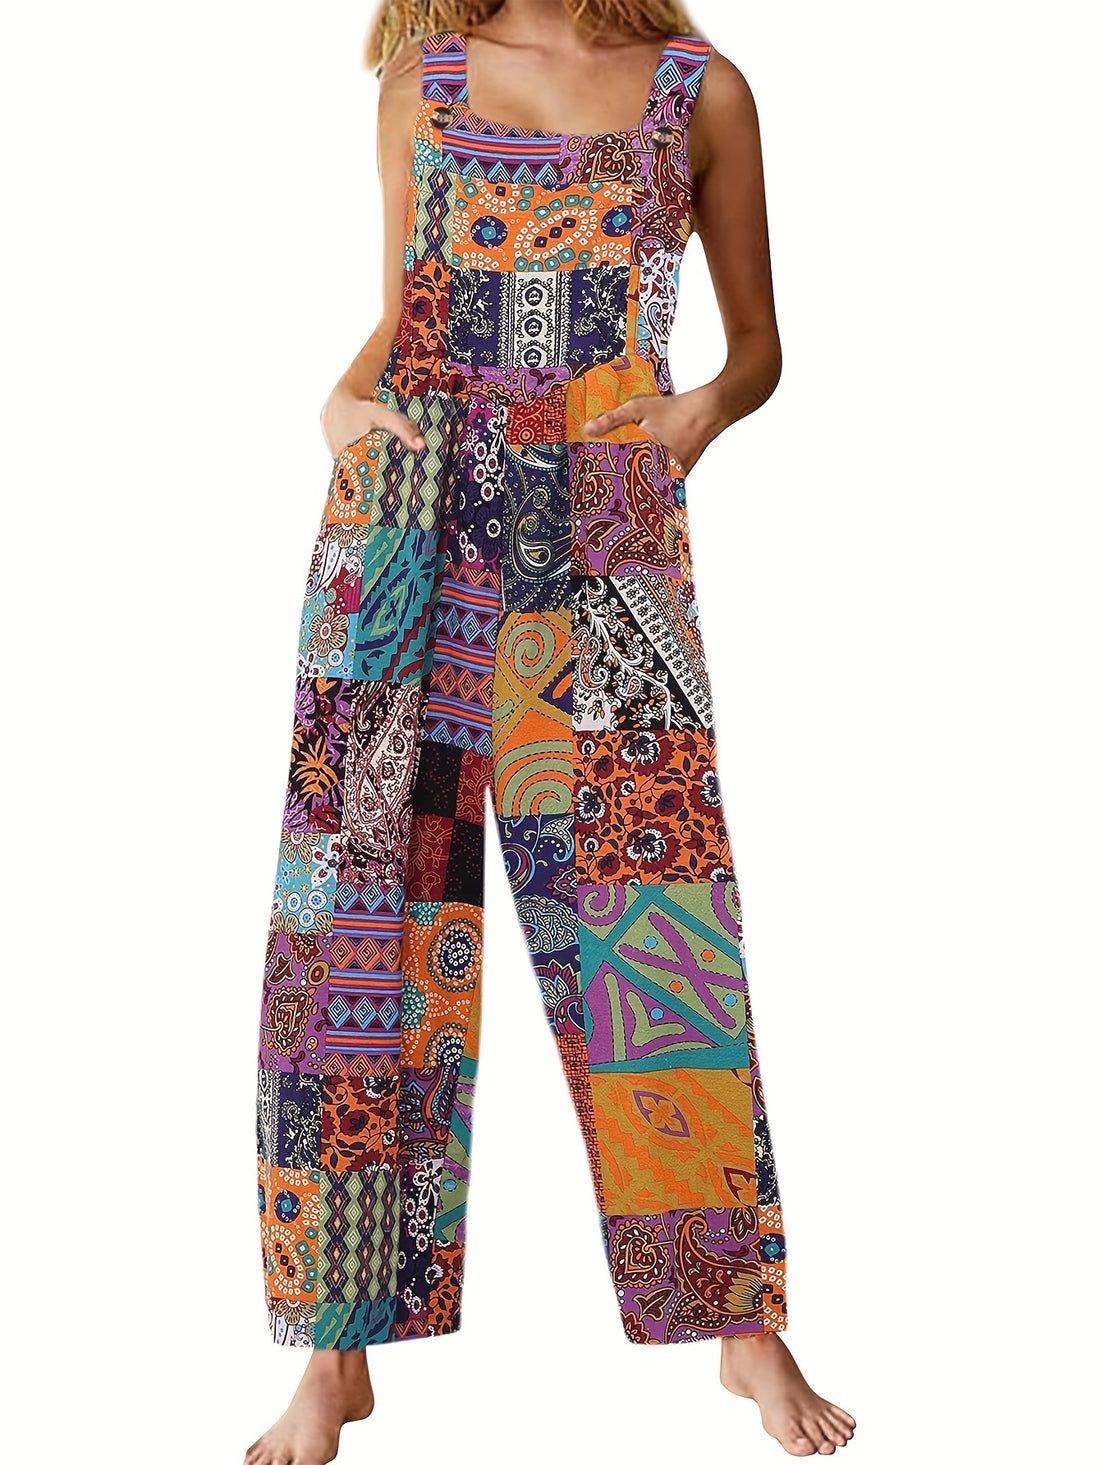 Tribal Print Wide Leg Culottes Jumpsuit with Pockets - Soft Cotton, Off the Shoulder, Sleeveless, Micro Elasticity, Casual Style for Summer - Womens Comfy Square Neck Clothing - Fashionqueene.com